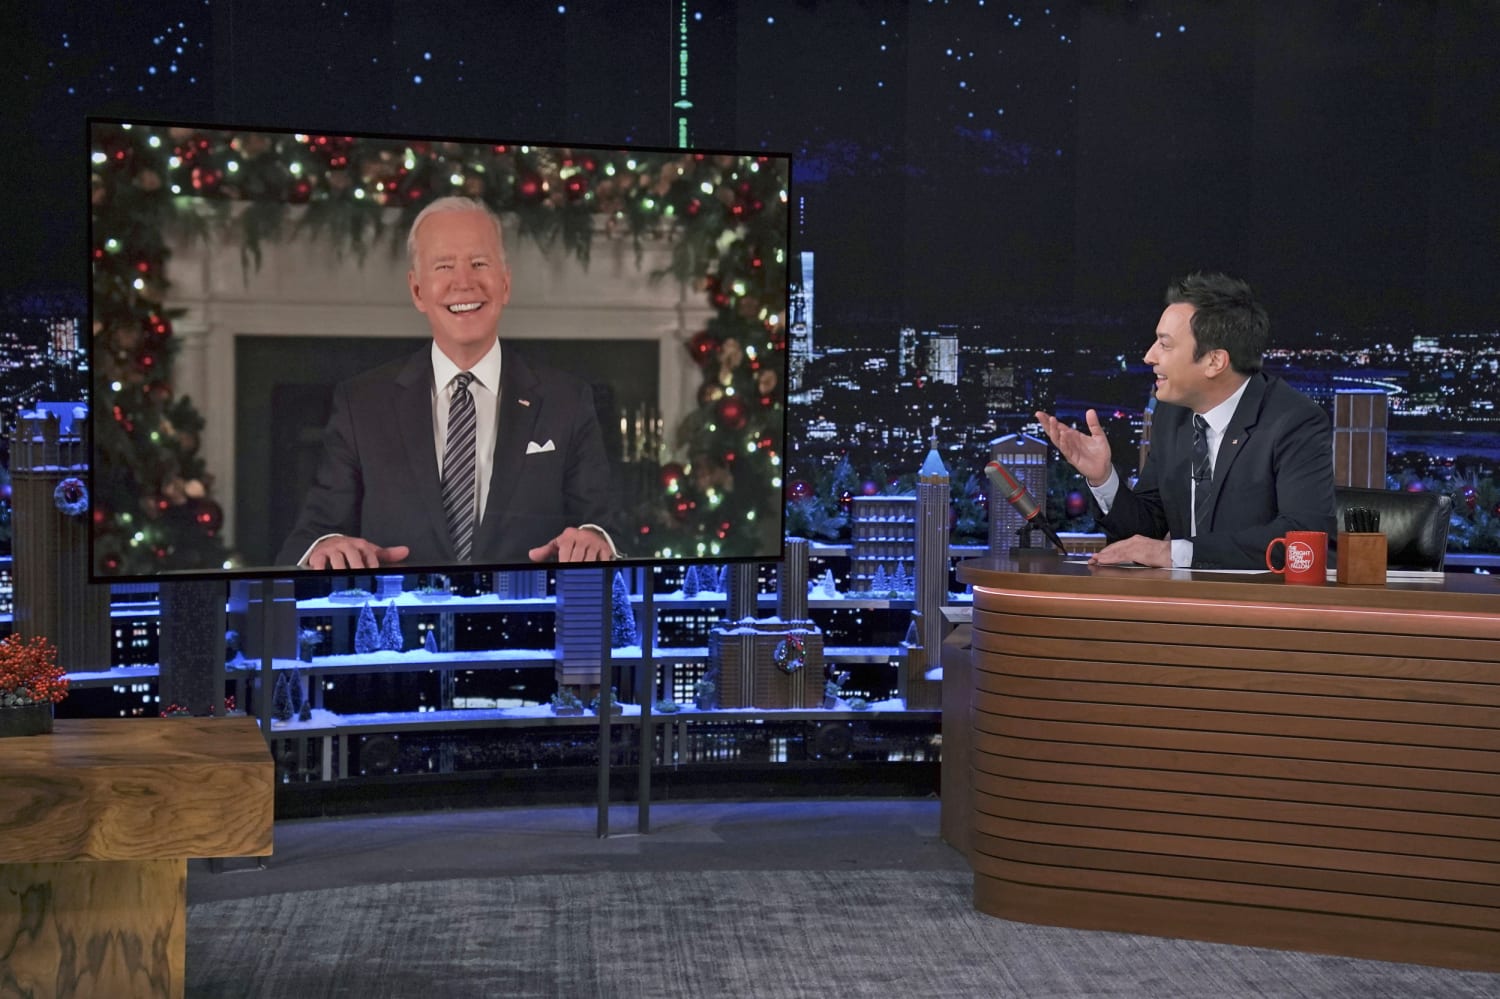 Biden stops by NBC’s ‘Tonight Show’ in first late-night appearance as president